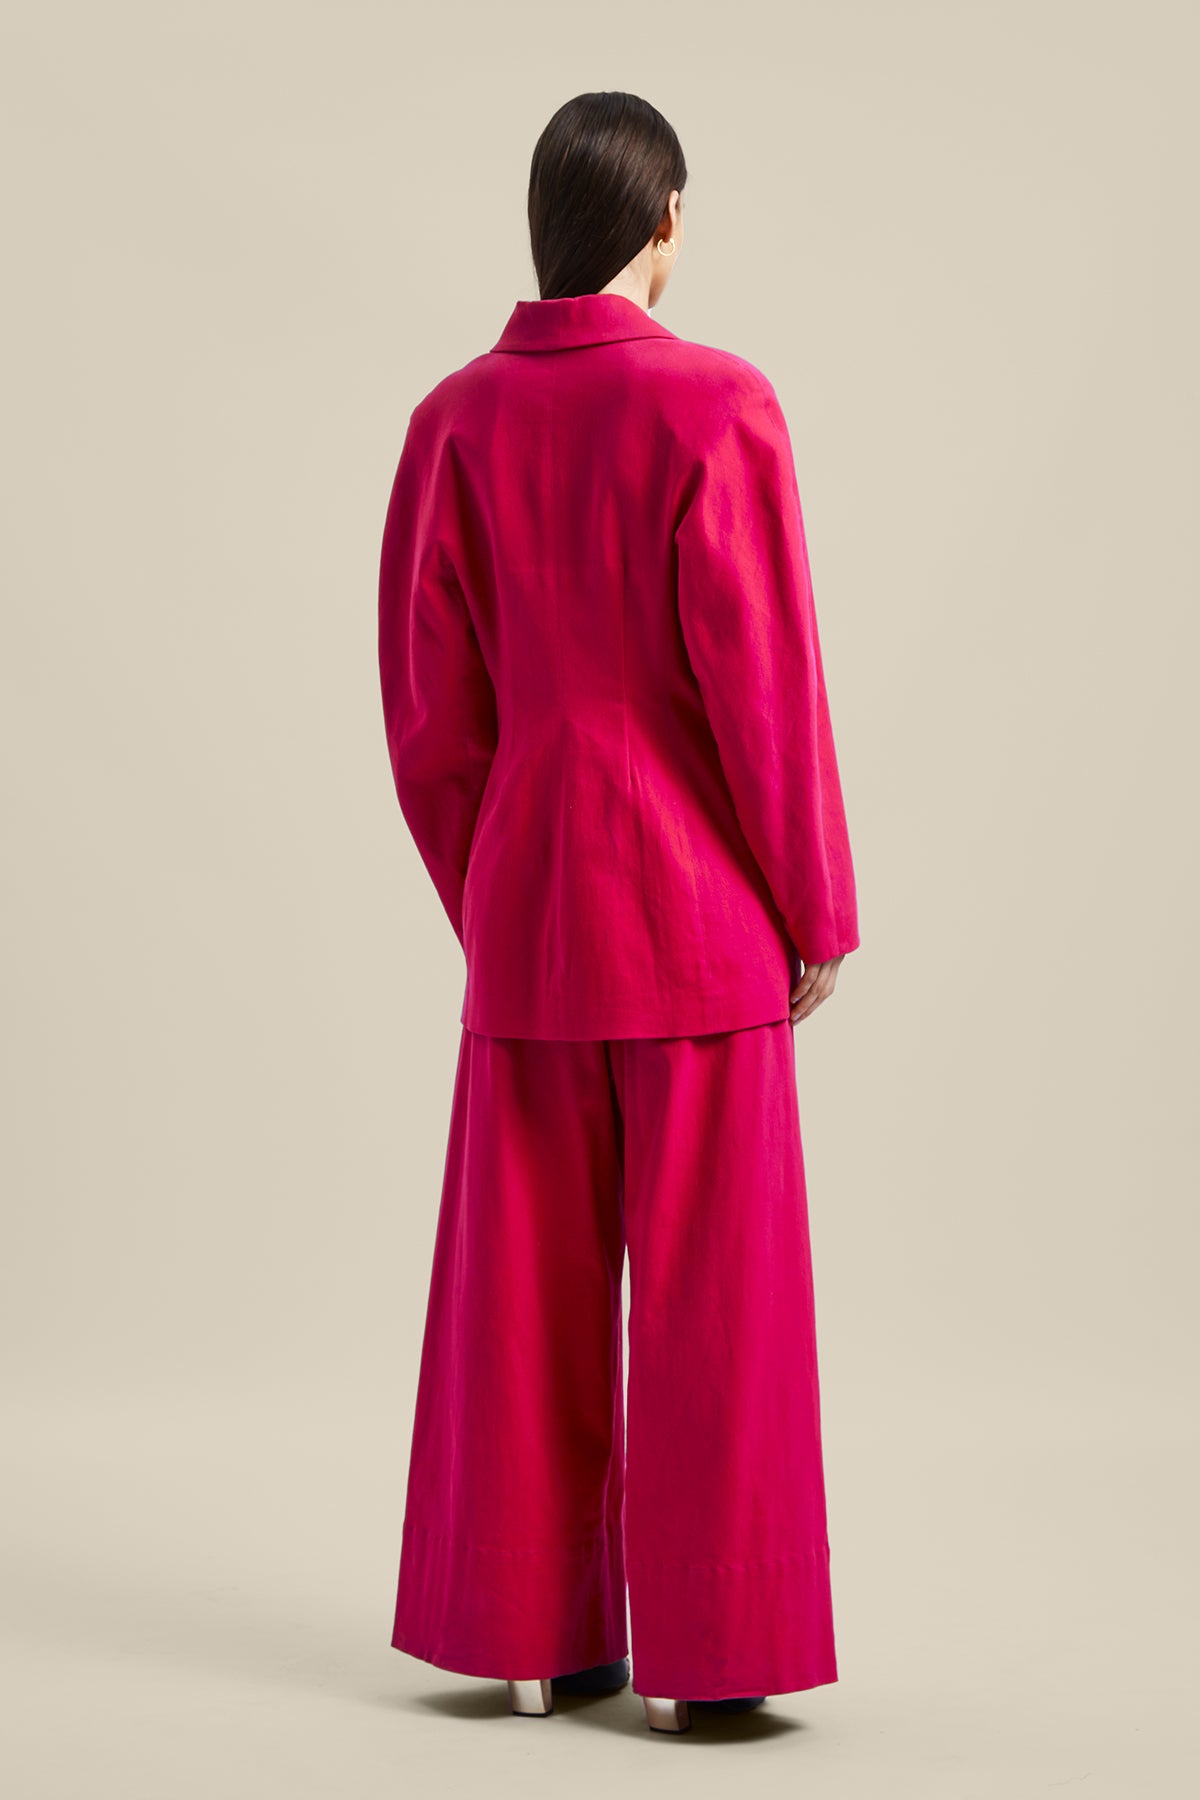 Back view of Model wearing the pink Novelist Jacket from Australian fashion designer GINGER & SMART featuring, tailored structural cut and oversized shape. Worn with the pink Novelist Pant.